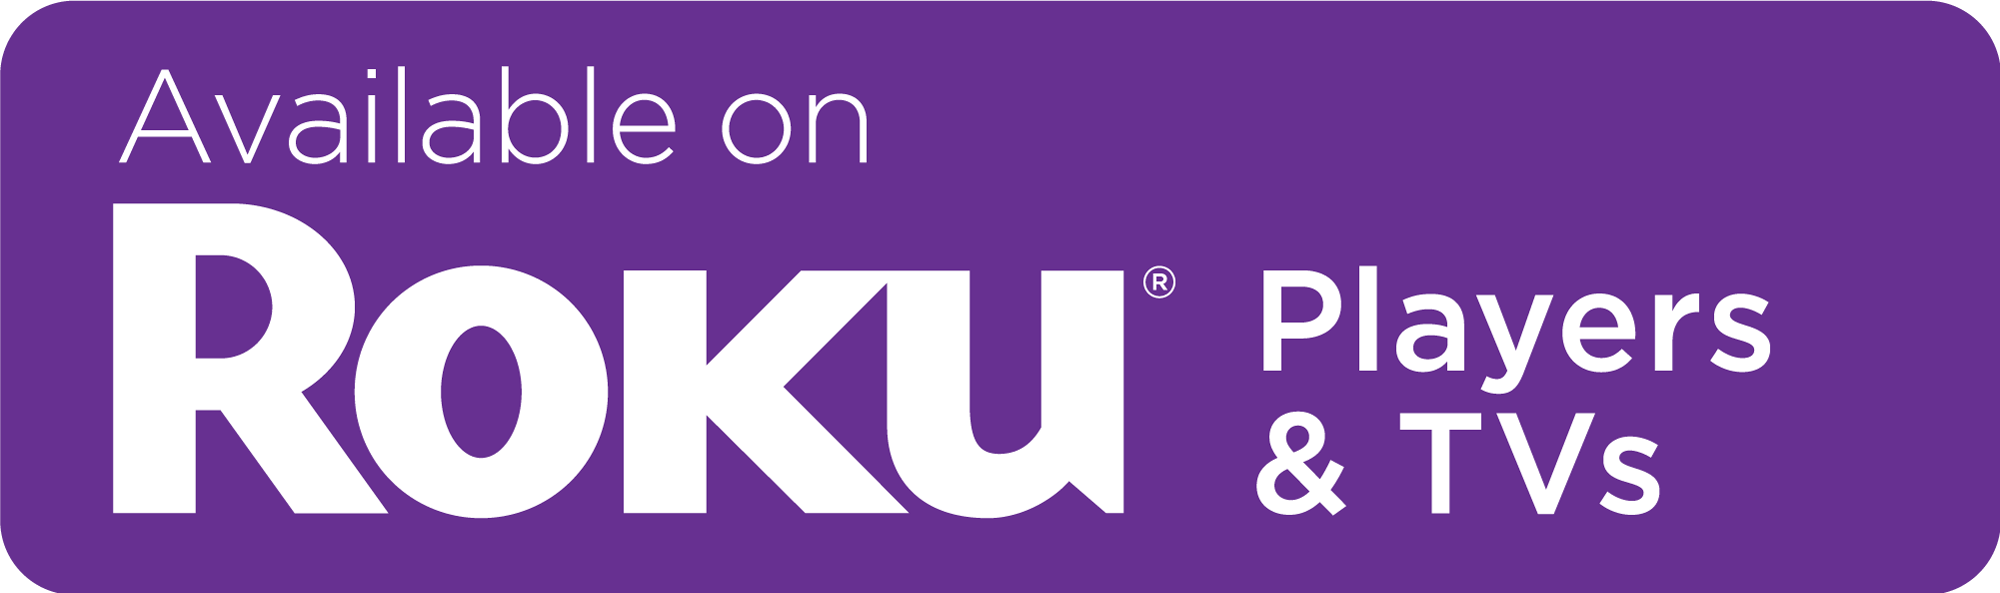 Download The Roku Channel - Roku Available On Players Clipart (2000x593), Png Download